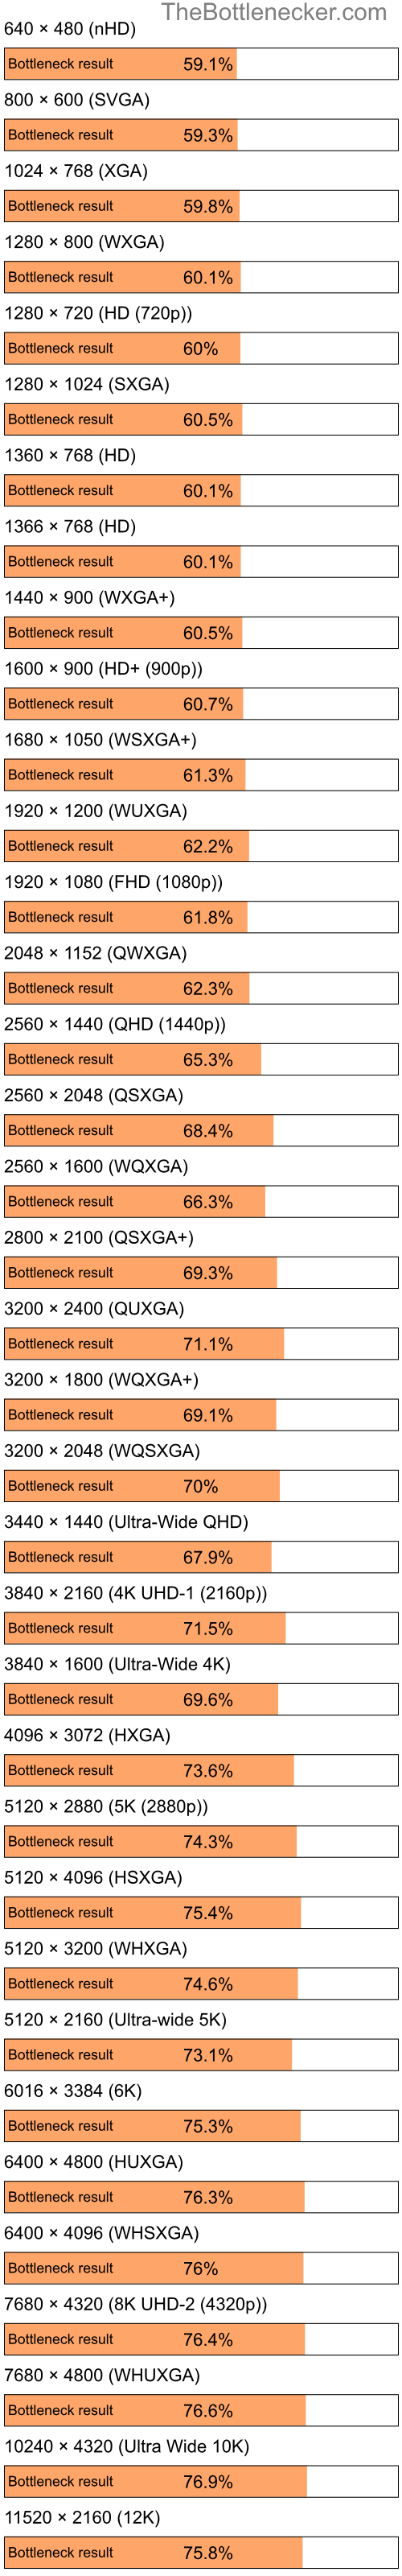 Bottleneck results by resolution for Intel Pentium 4 and NVIDIA GeForce 7300 GS in Processor Intense Tasks